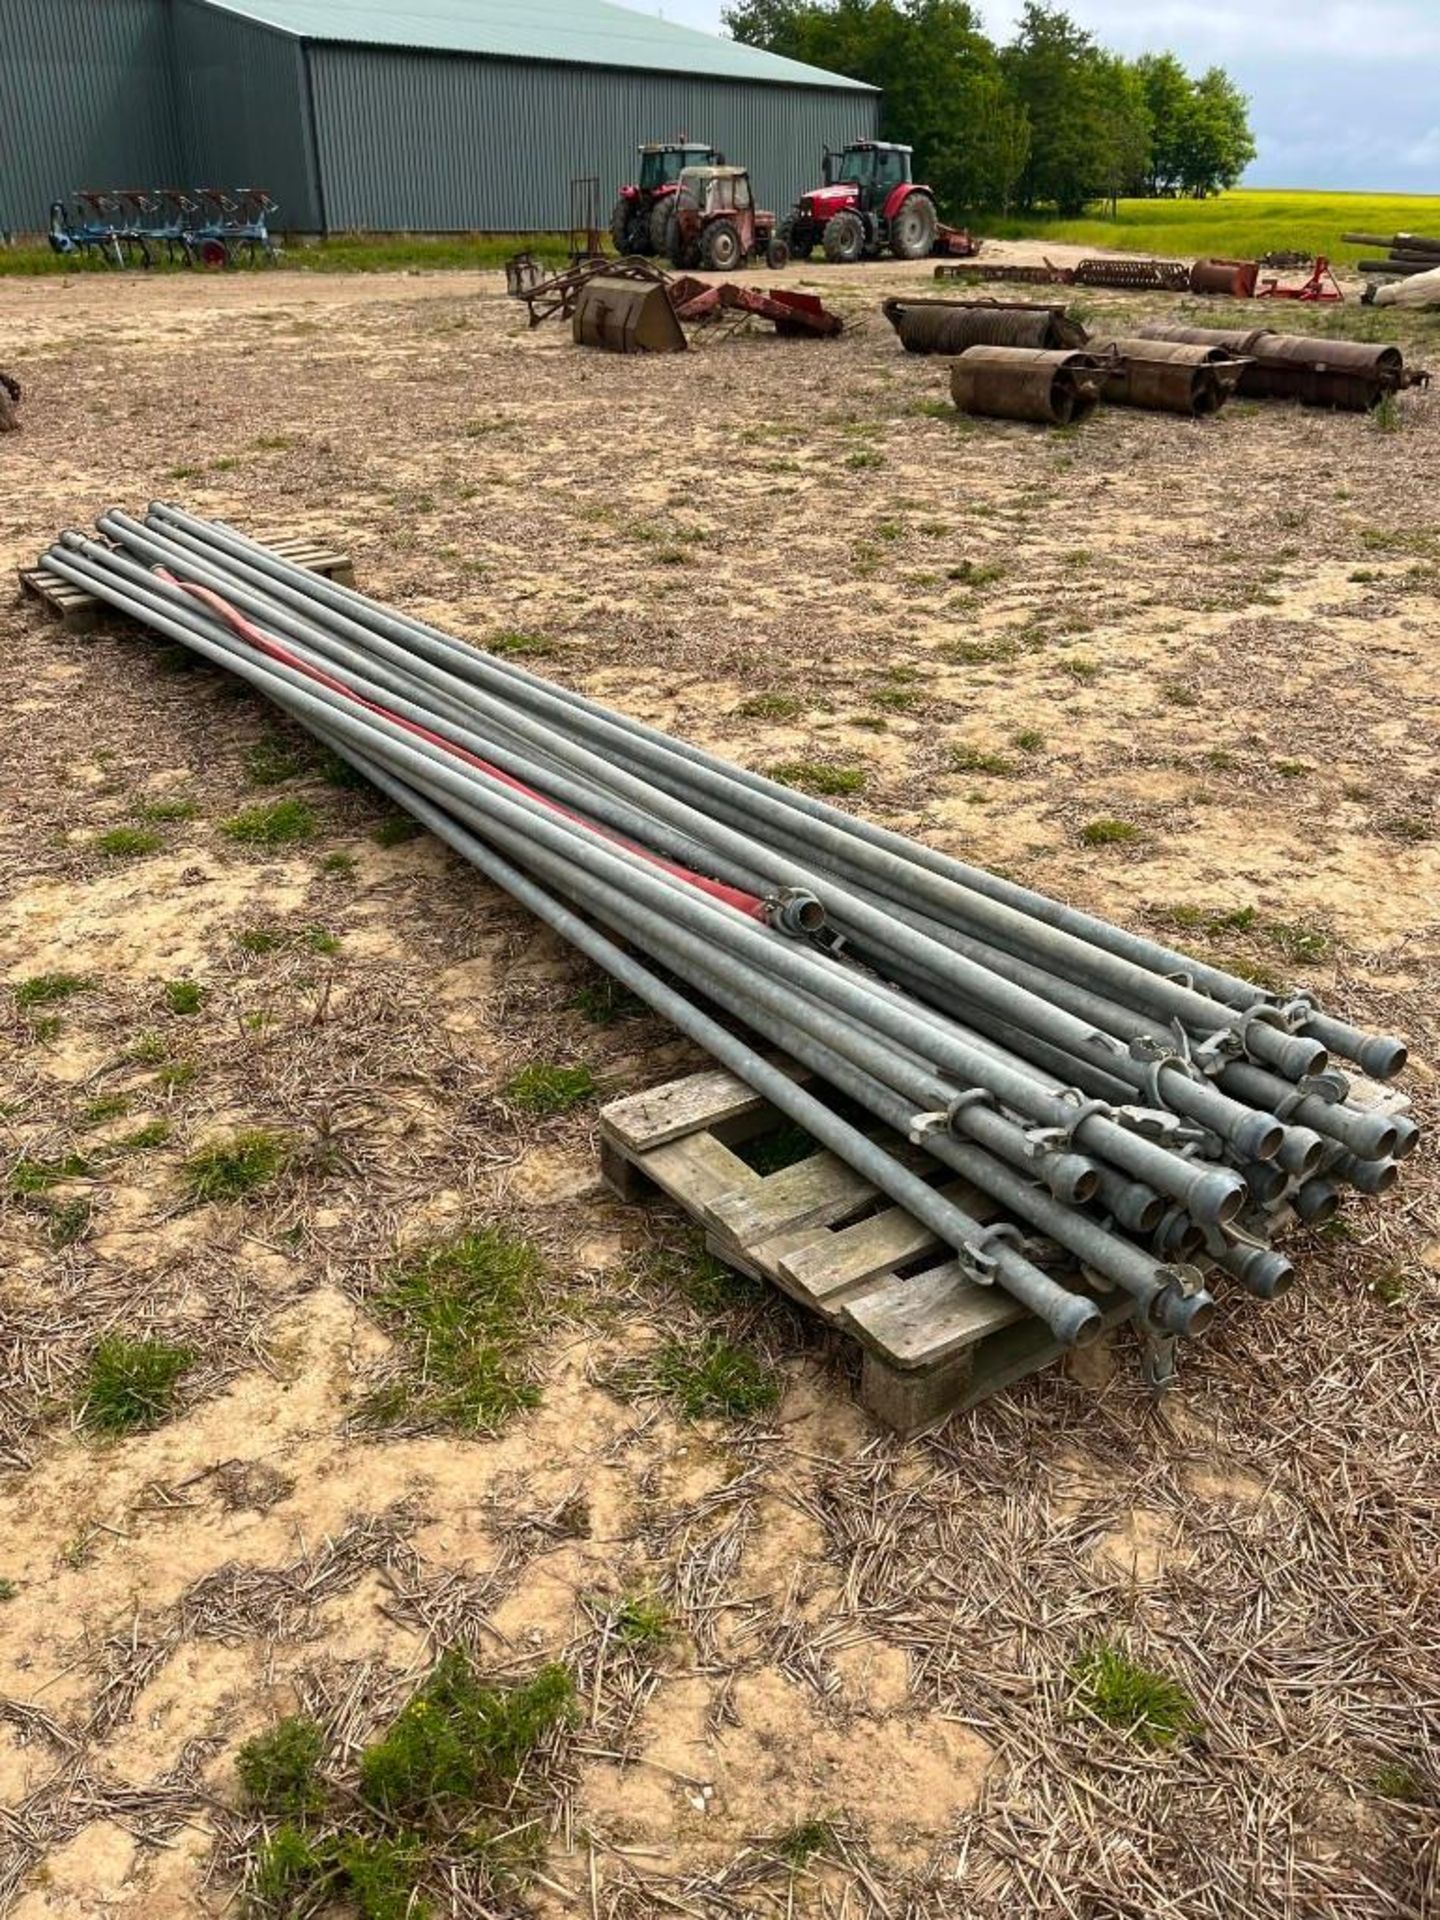 24No. 2" Galvanised Irrigation Pipes